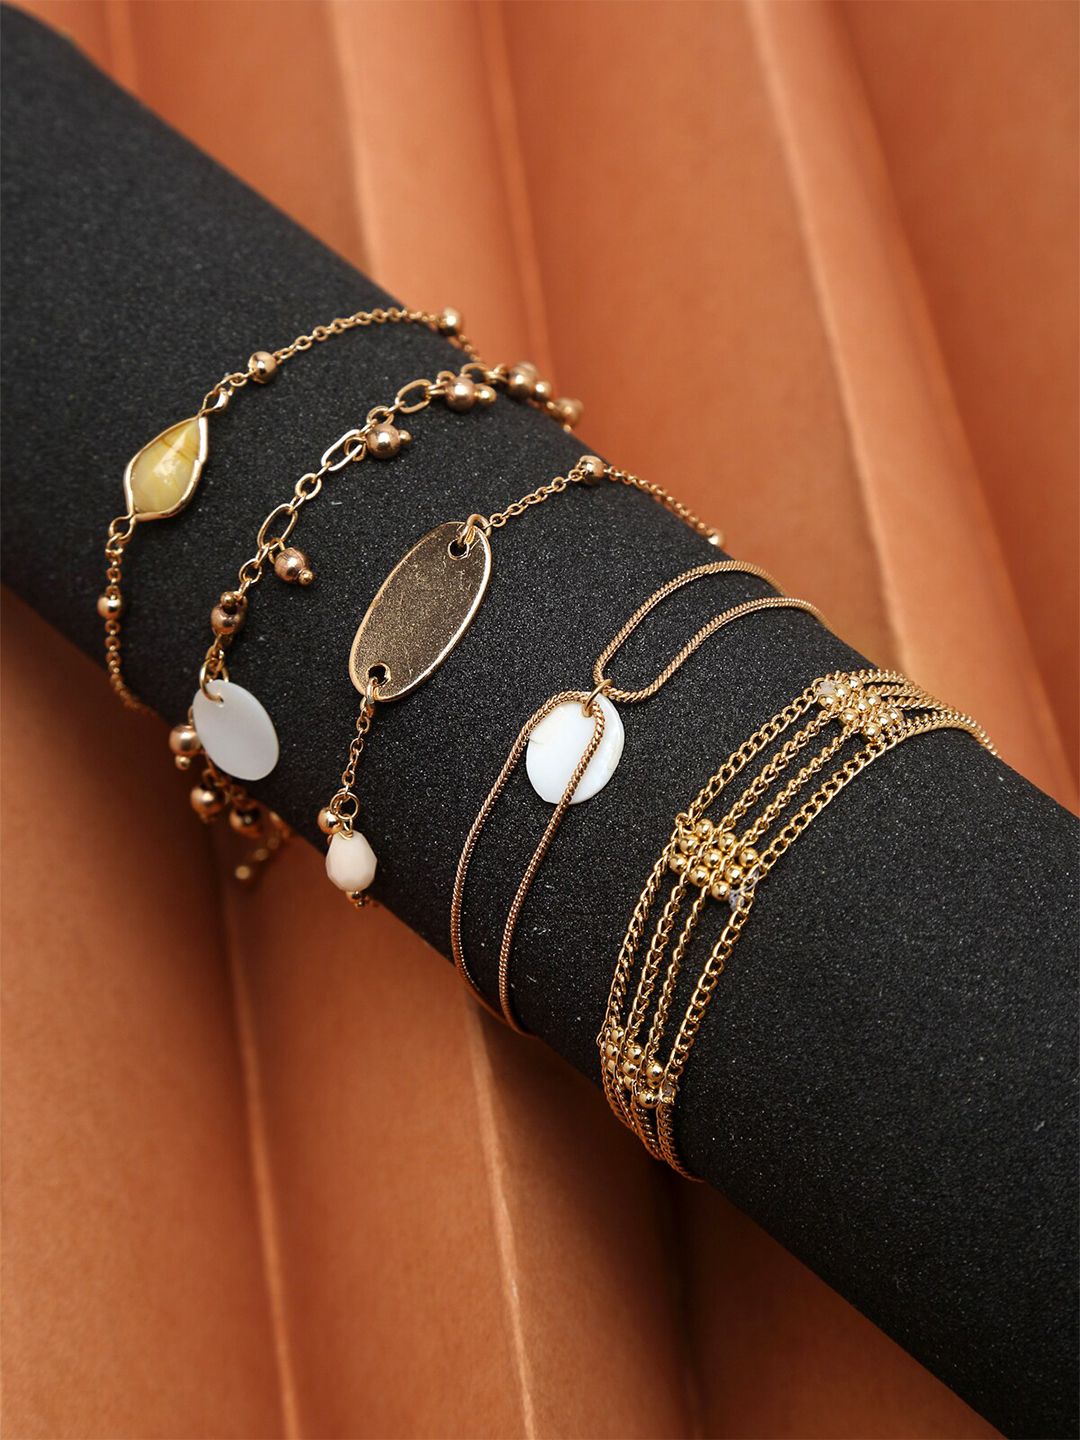 Madame Women 5 Rose Gold & White Rose Gold-Plated Multistrand Bracelet Price in India